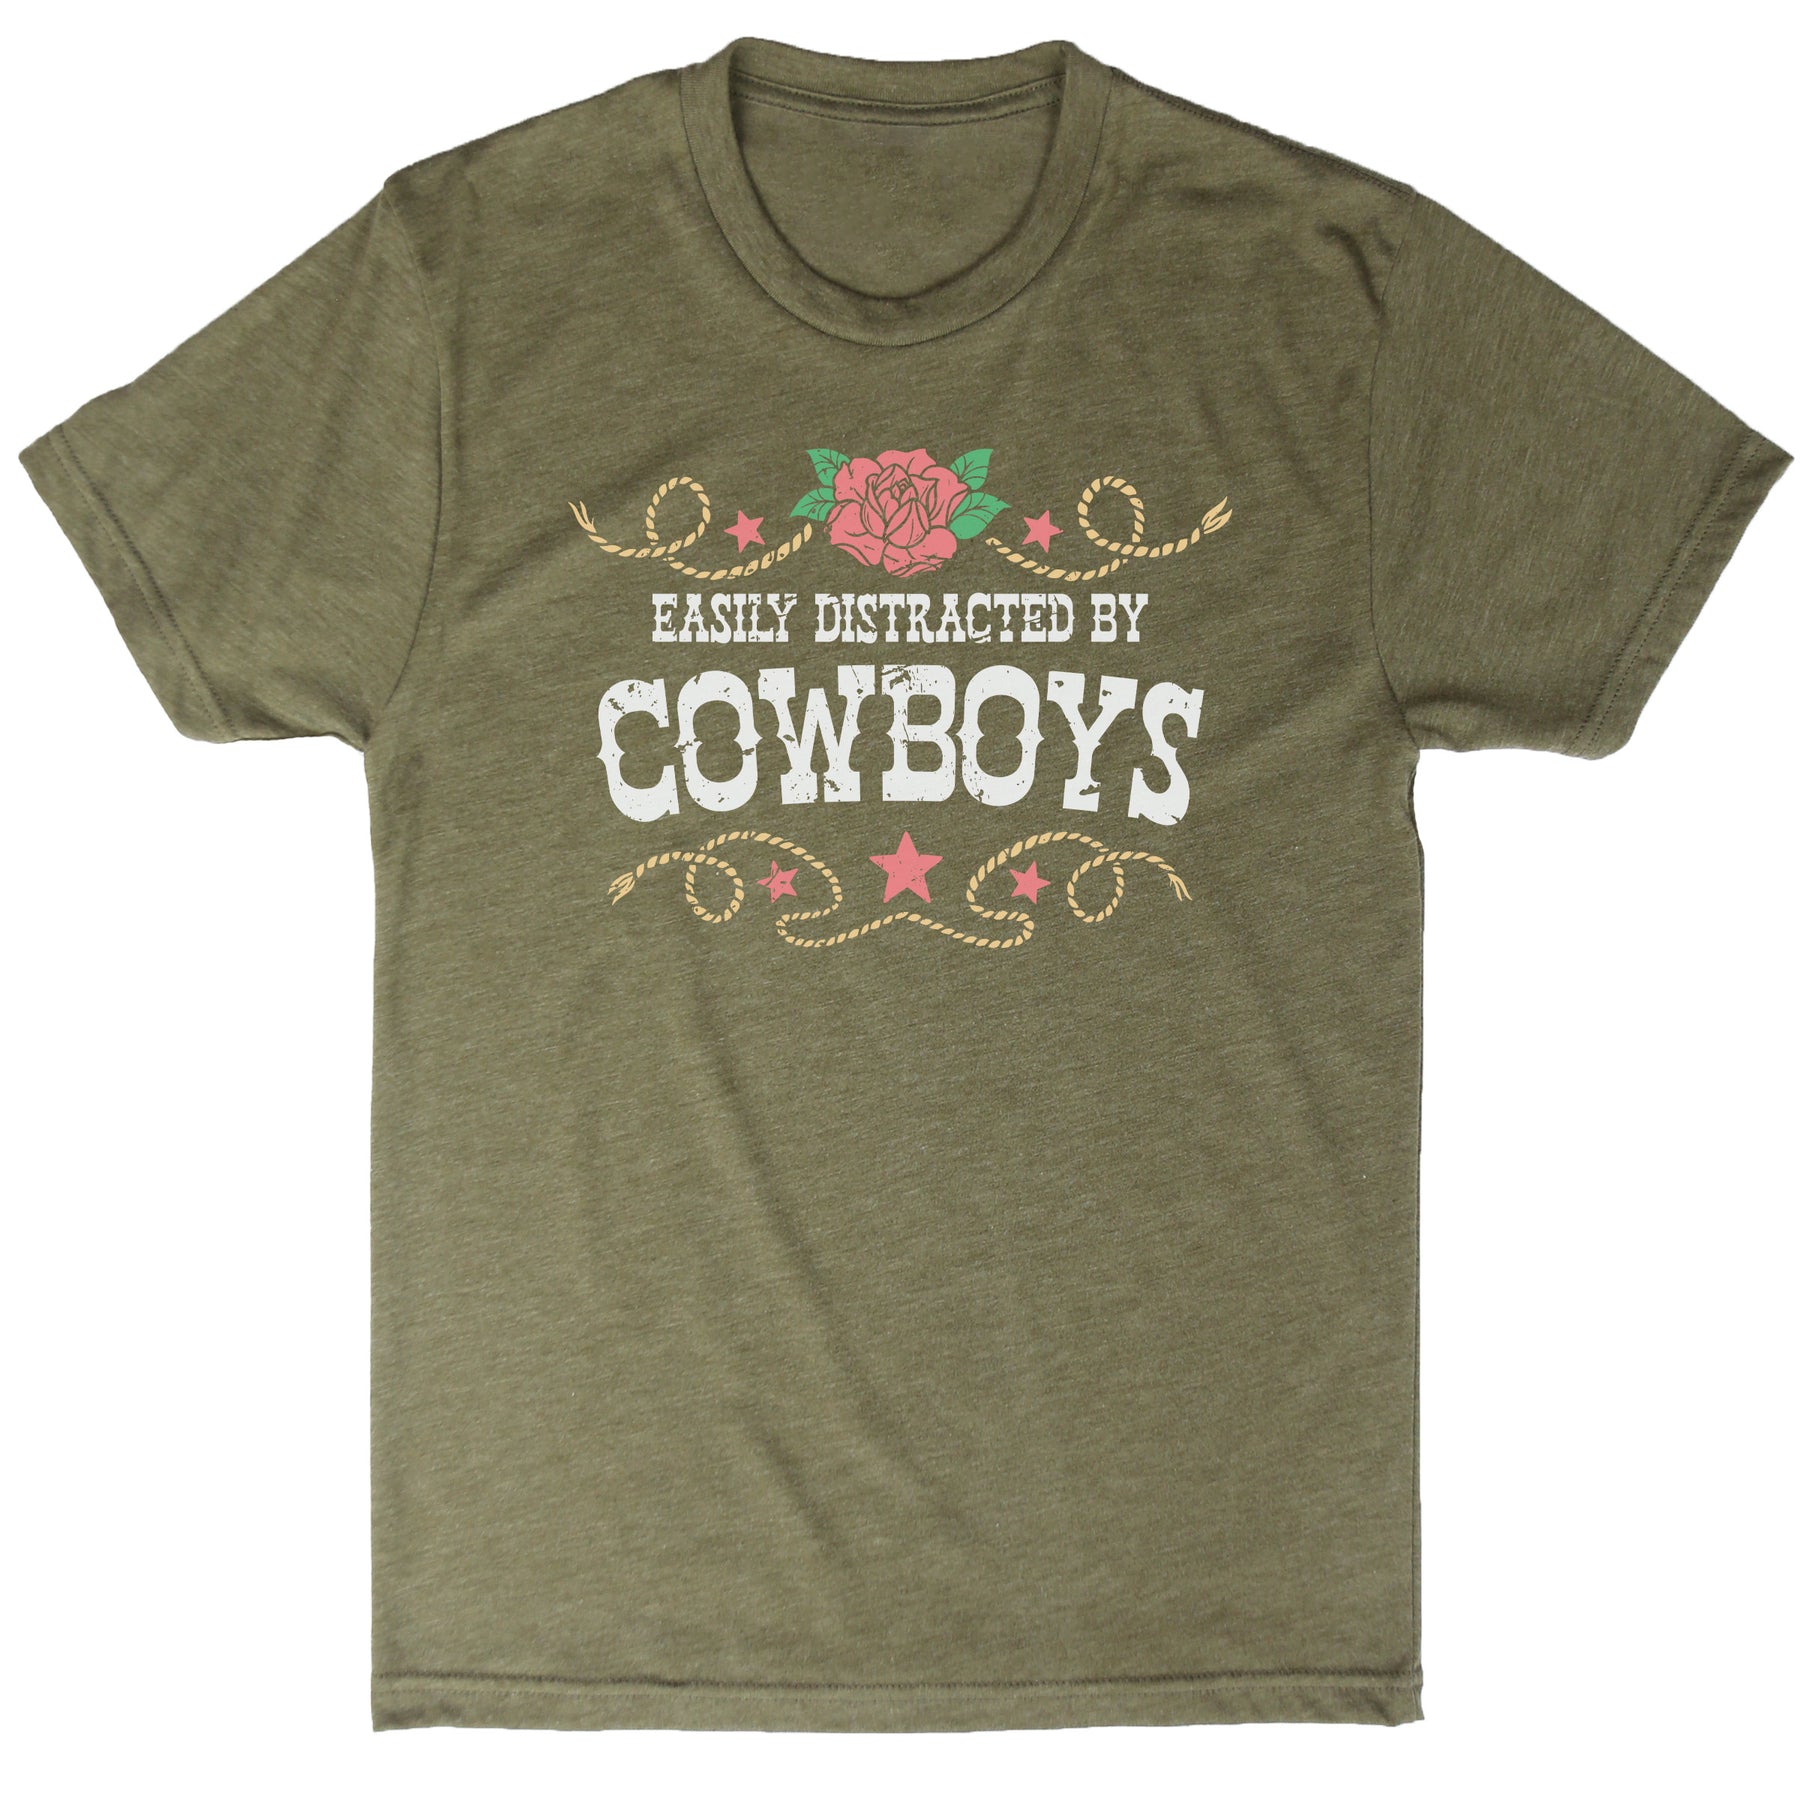 Easily Distracted by Cowboys Tee